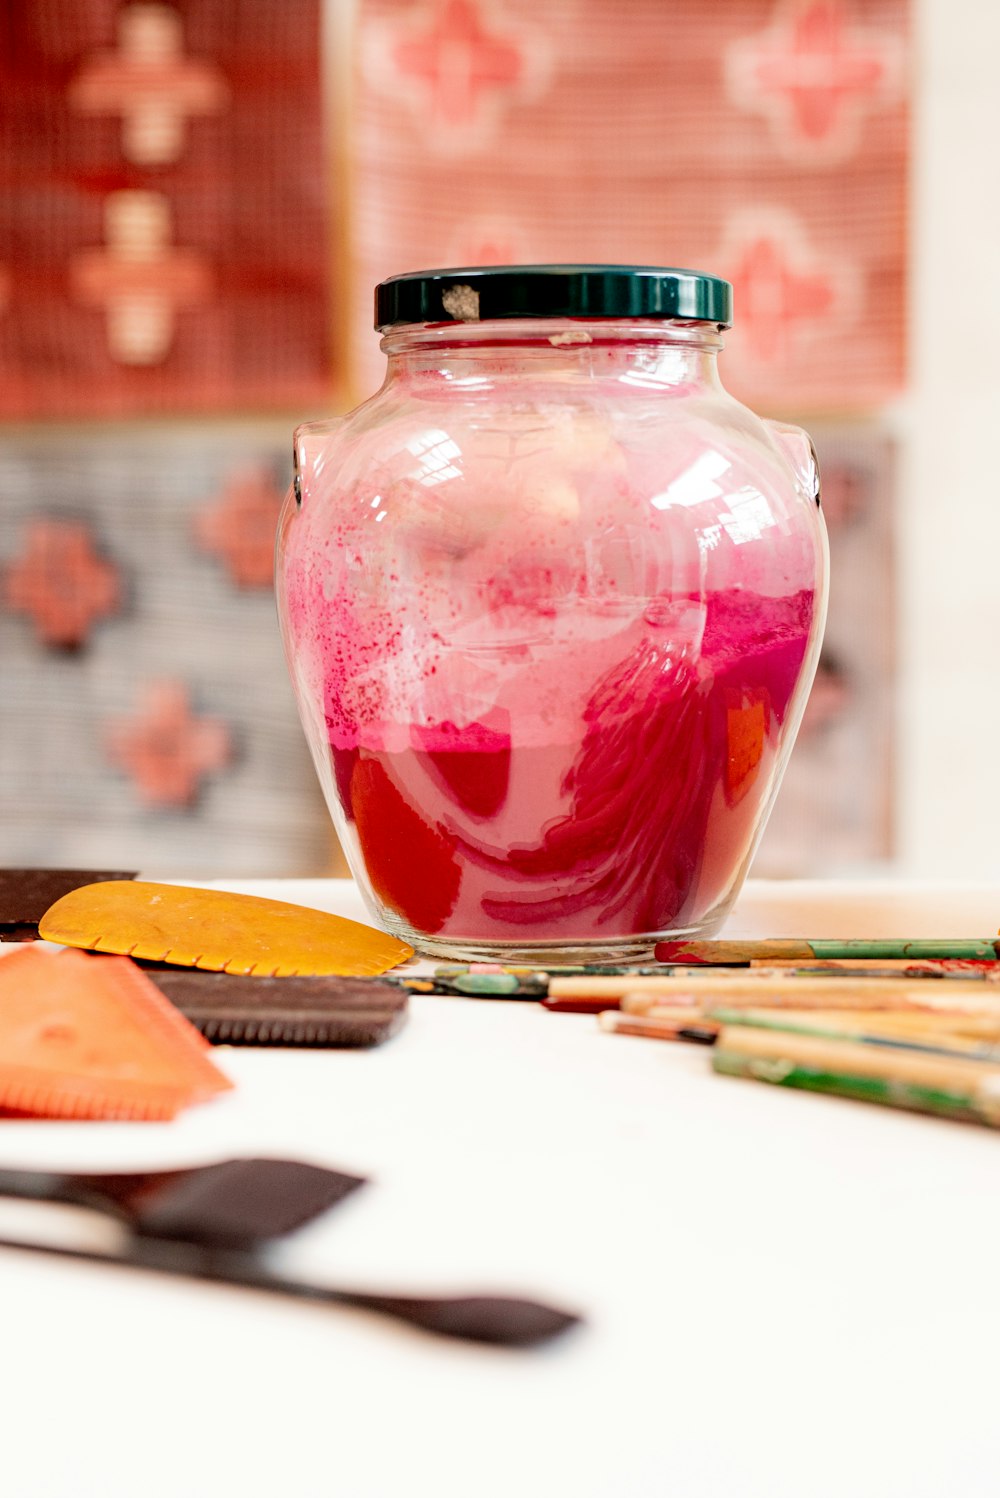 red glass jar with black lid